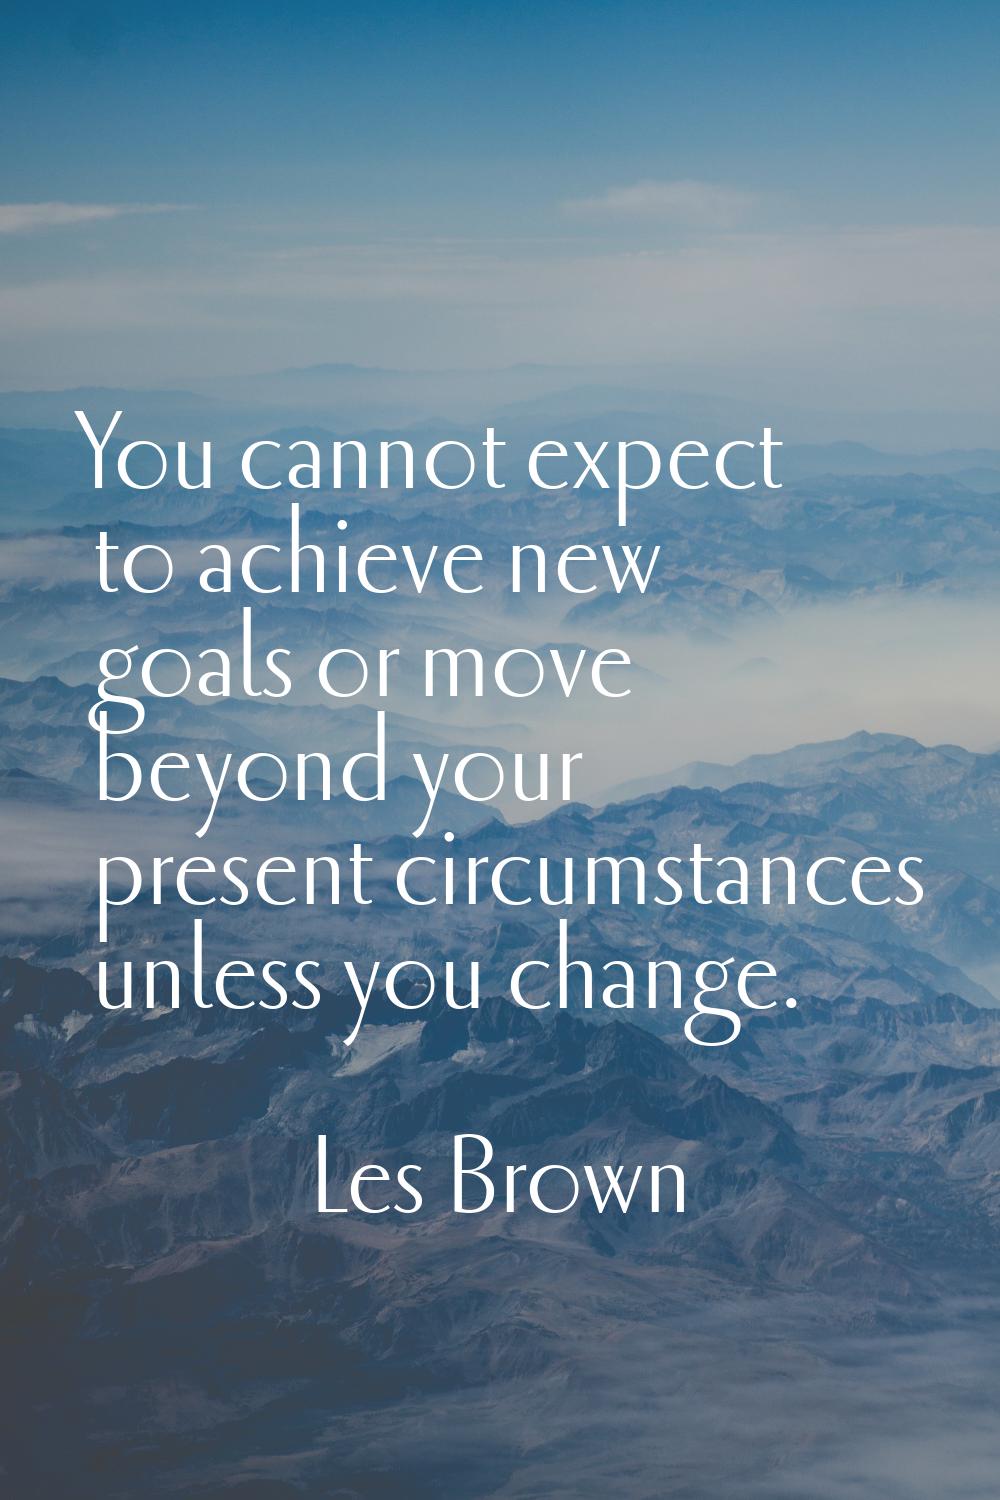 You cannot expect to achieve new goals or move beyond your present circumstances unless you change.